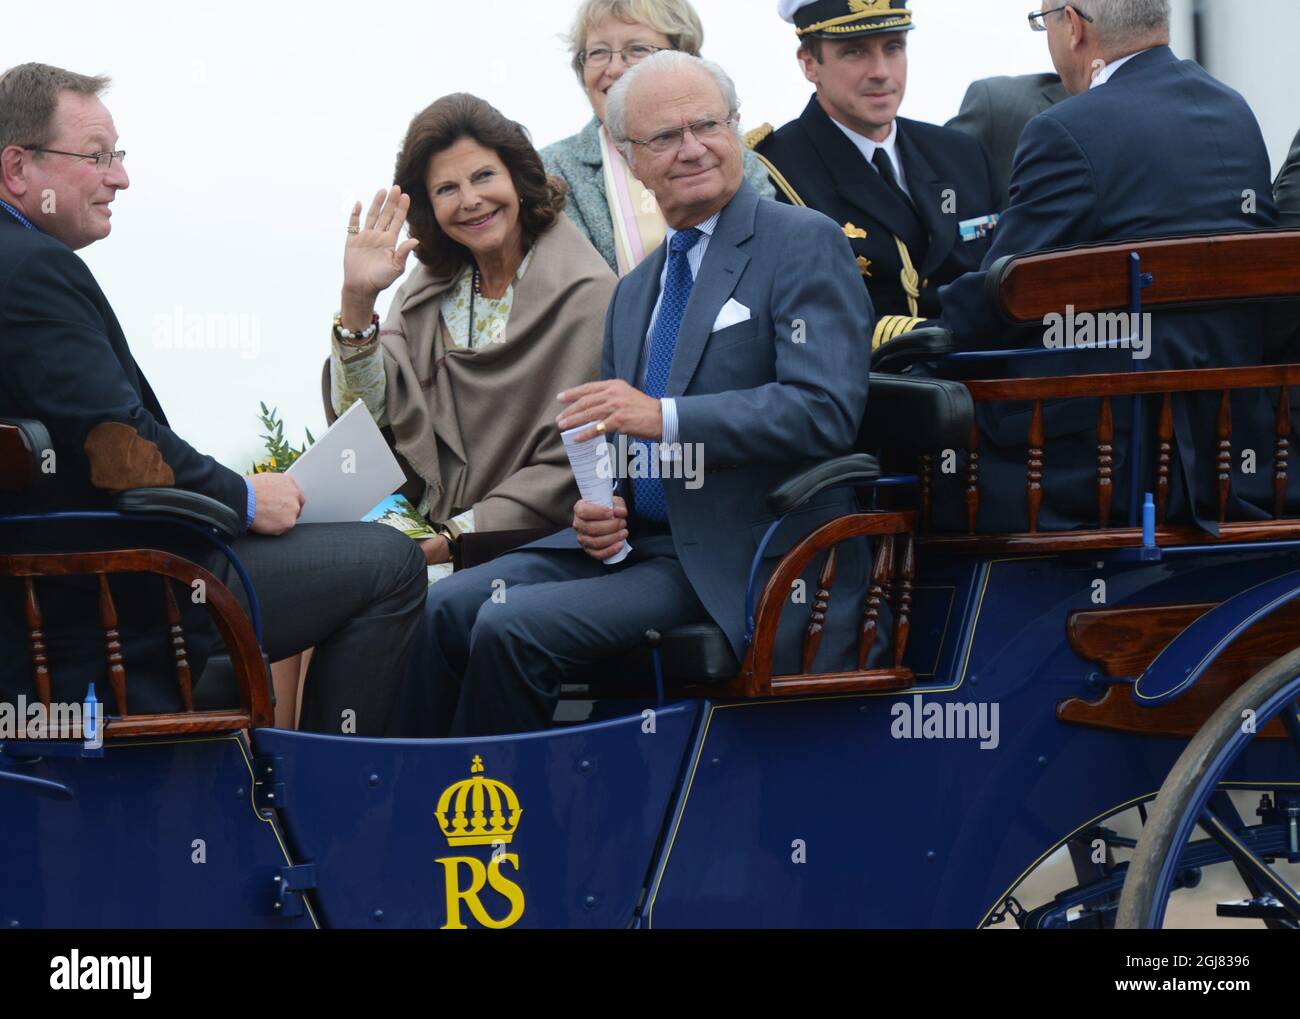 STROMSHOLM 20130830 King Carl Gustaf and Queen Silvia are seen arriving to the Stromsholms riding school i Stromsholm, Sweden, August 30, 2013. The visit is a part of the Kings ongoing 40 year anniversary on the throne. Foto: Fredrik Sandberg / SCANPIX / Kod 10080  Stock Photo